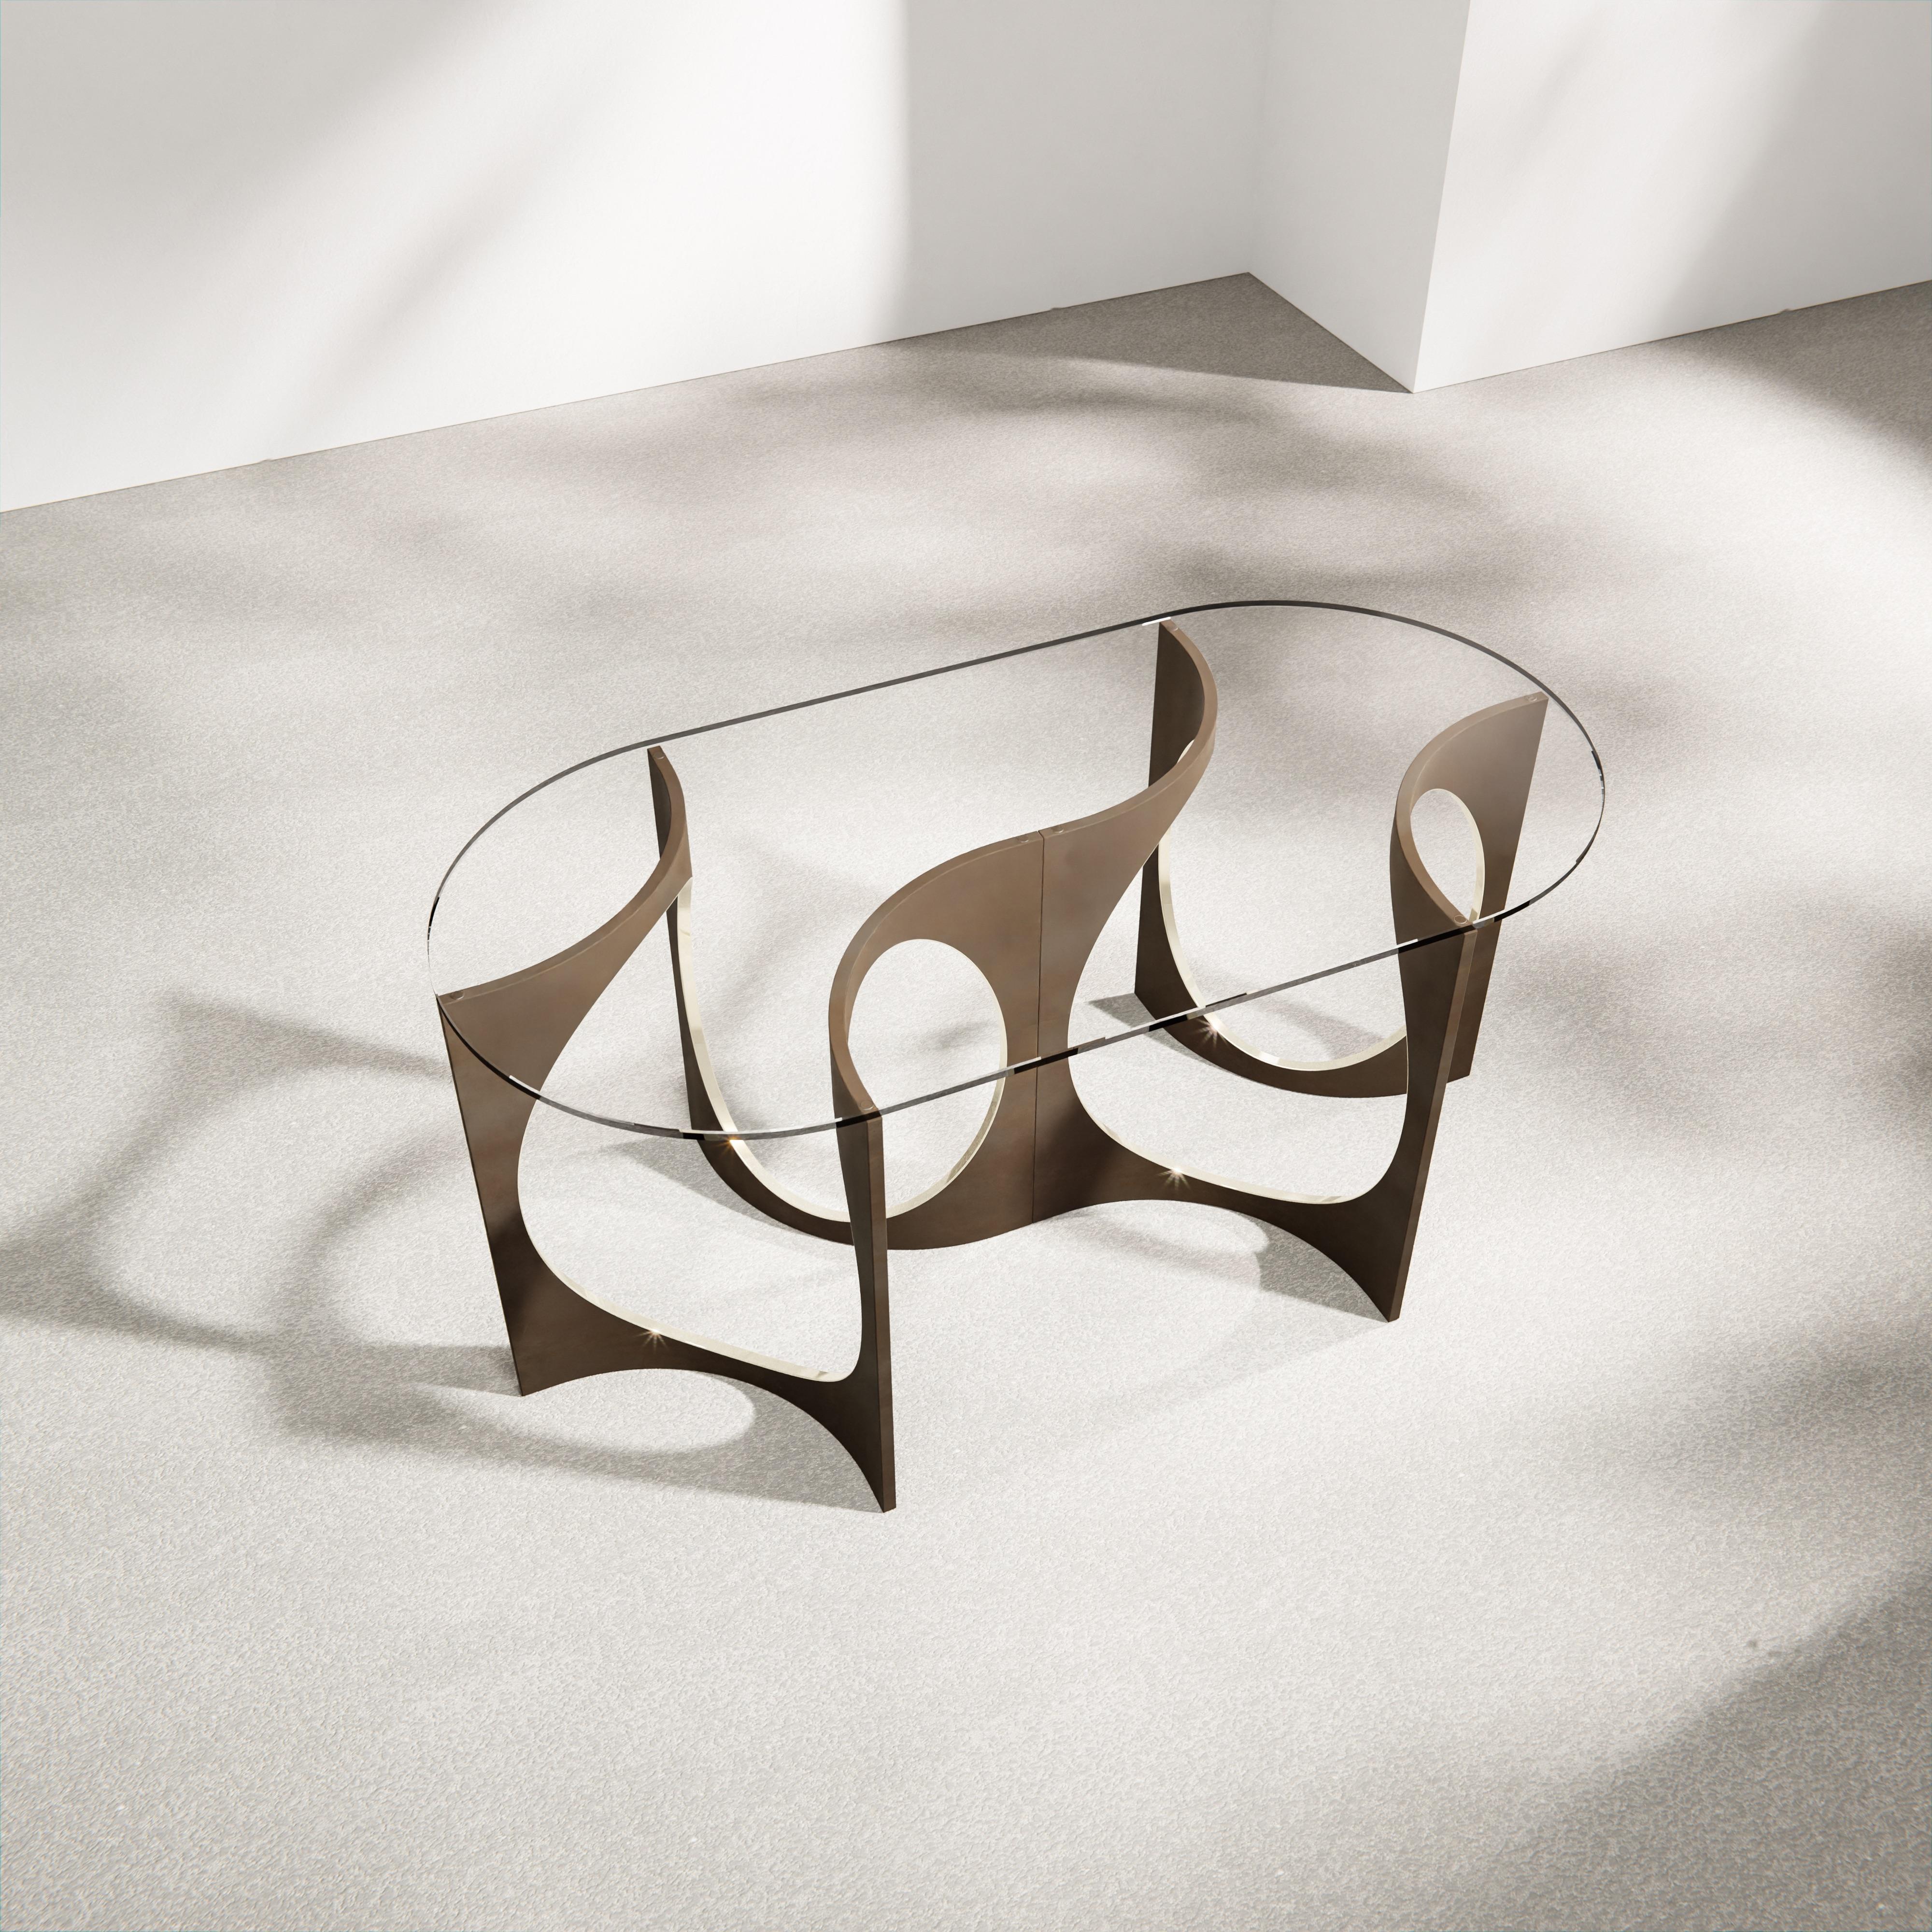 The Fuga table is a sculptural table with timeless elegance. Each base is handcrafted in Belgium from four identical solid cast bronze elements that are artistically welded into a continuous, organically shaped sculpture. The bronze is patinated and